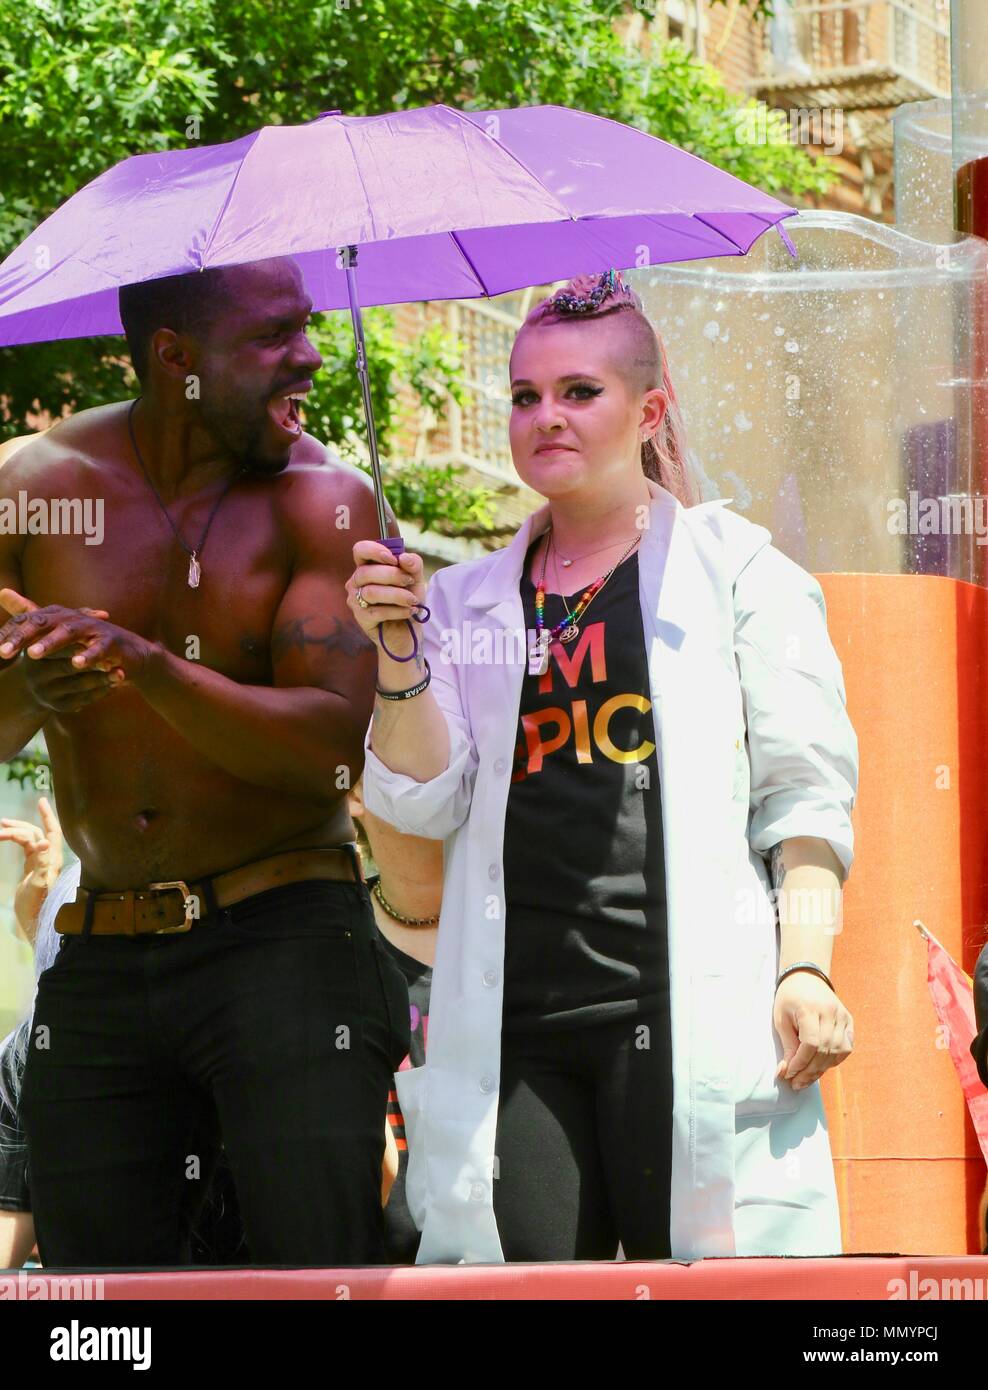 NEW YORK, NY - JUNE 25: Kelly Osbourne, Gbenga Akinnagbe attends during the 2017 Pride March in the West Village on June 25, 2017 in New York City   People:  Kelly Osbourne, Gbenga Akinnagbe Stock Photo